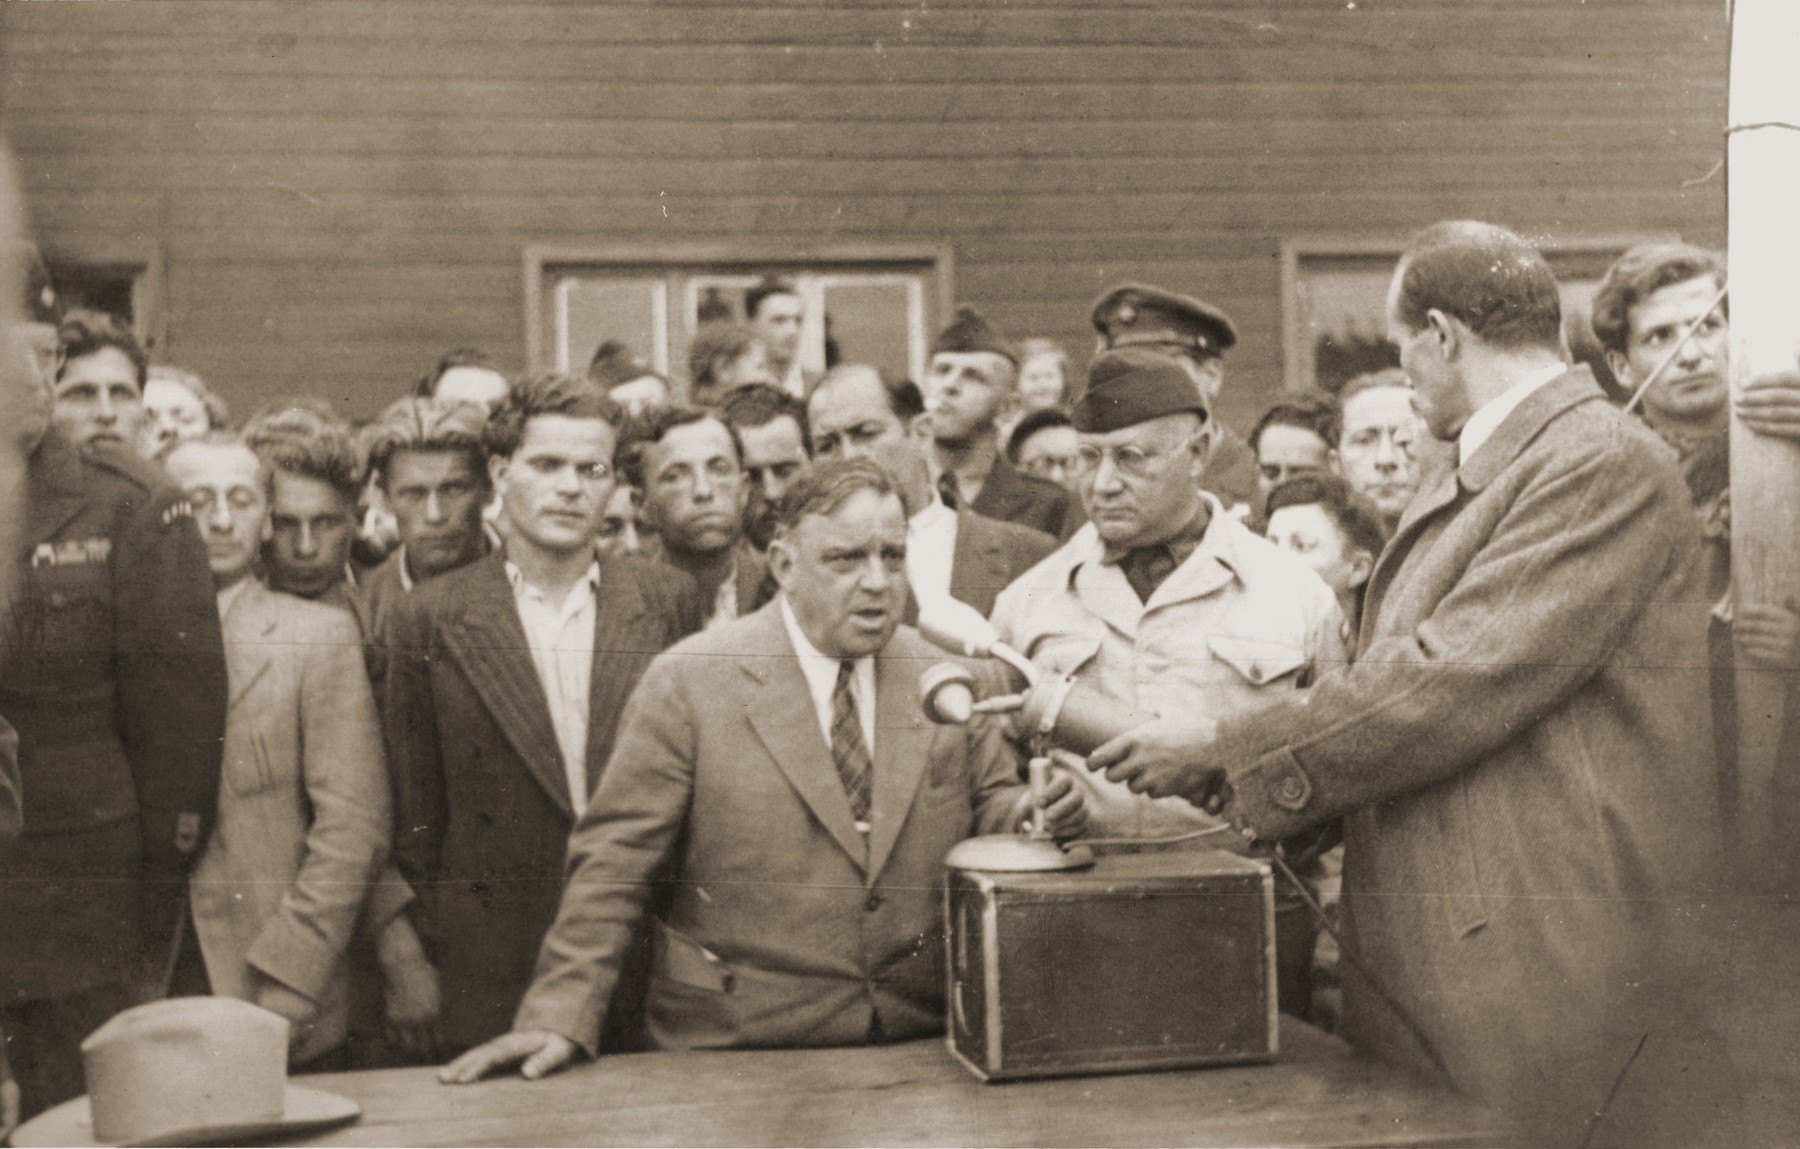 UNRRA Director General Fiorello LaGuardia delivers a speech at the Berlin-Schlachtensee displaced persons camp.  

Also pictured is UNRRA Schlachtensee camp director Harold Fishbein (standing next to LaGuardia on the right).